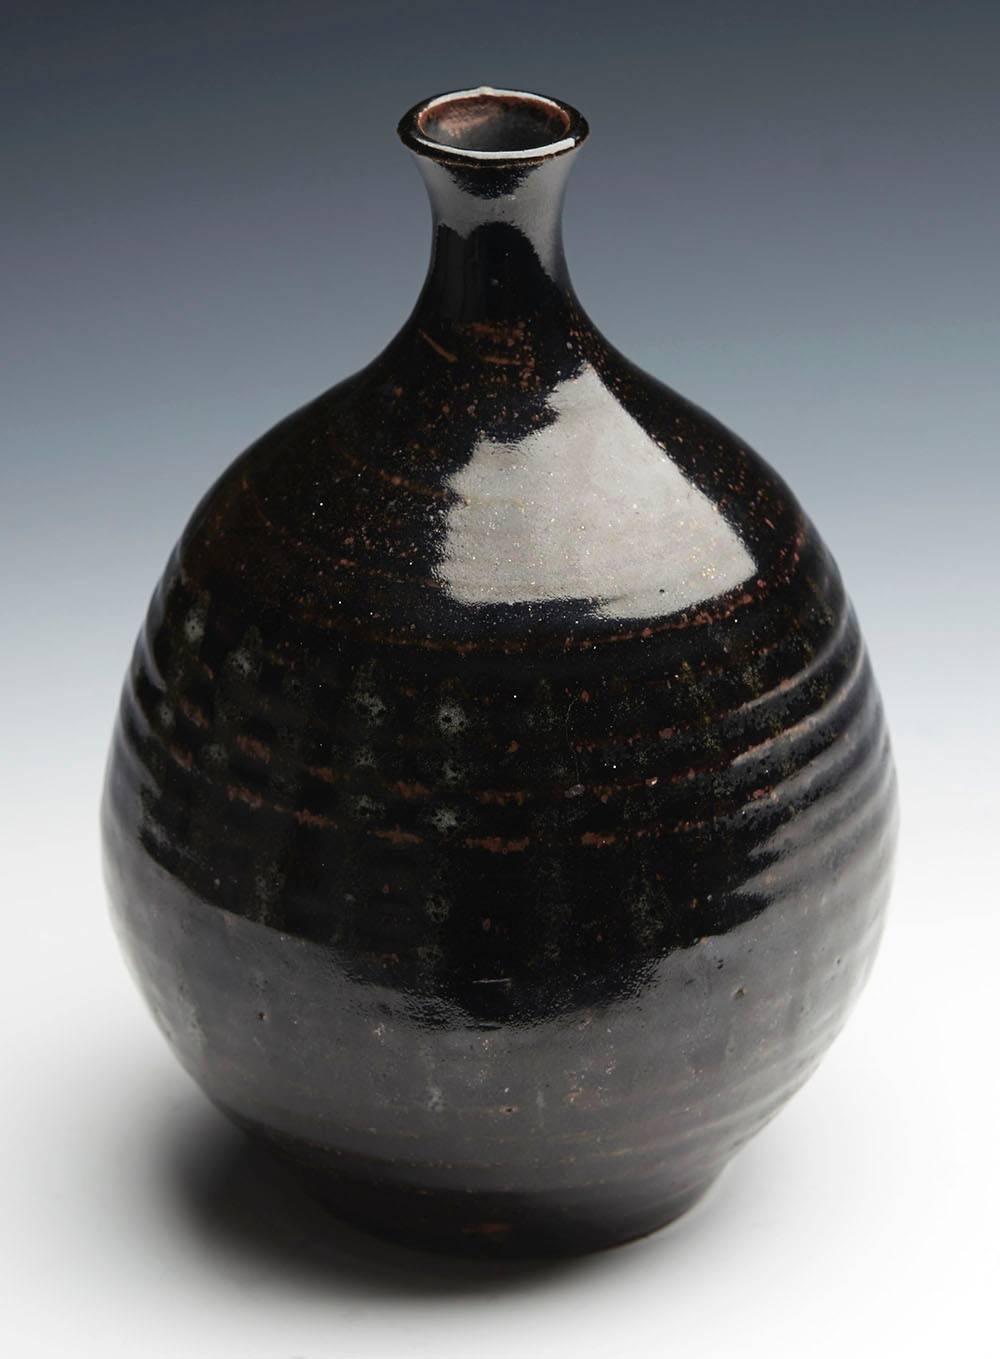 An antique Japanese stoneware bottle shaped vase decorated in tenmoku glazes and possibly dating from the 18th-19th century. This very stylish stoneware vase stands on an unglazed rounded foot with a slightly recessed base and has a rounded bulbous